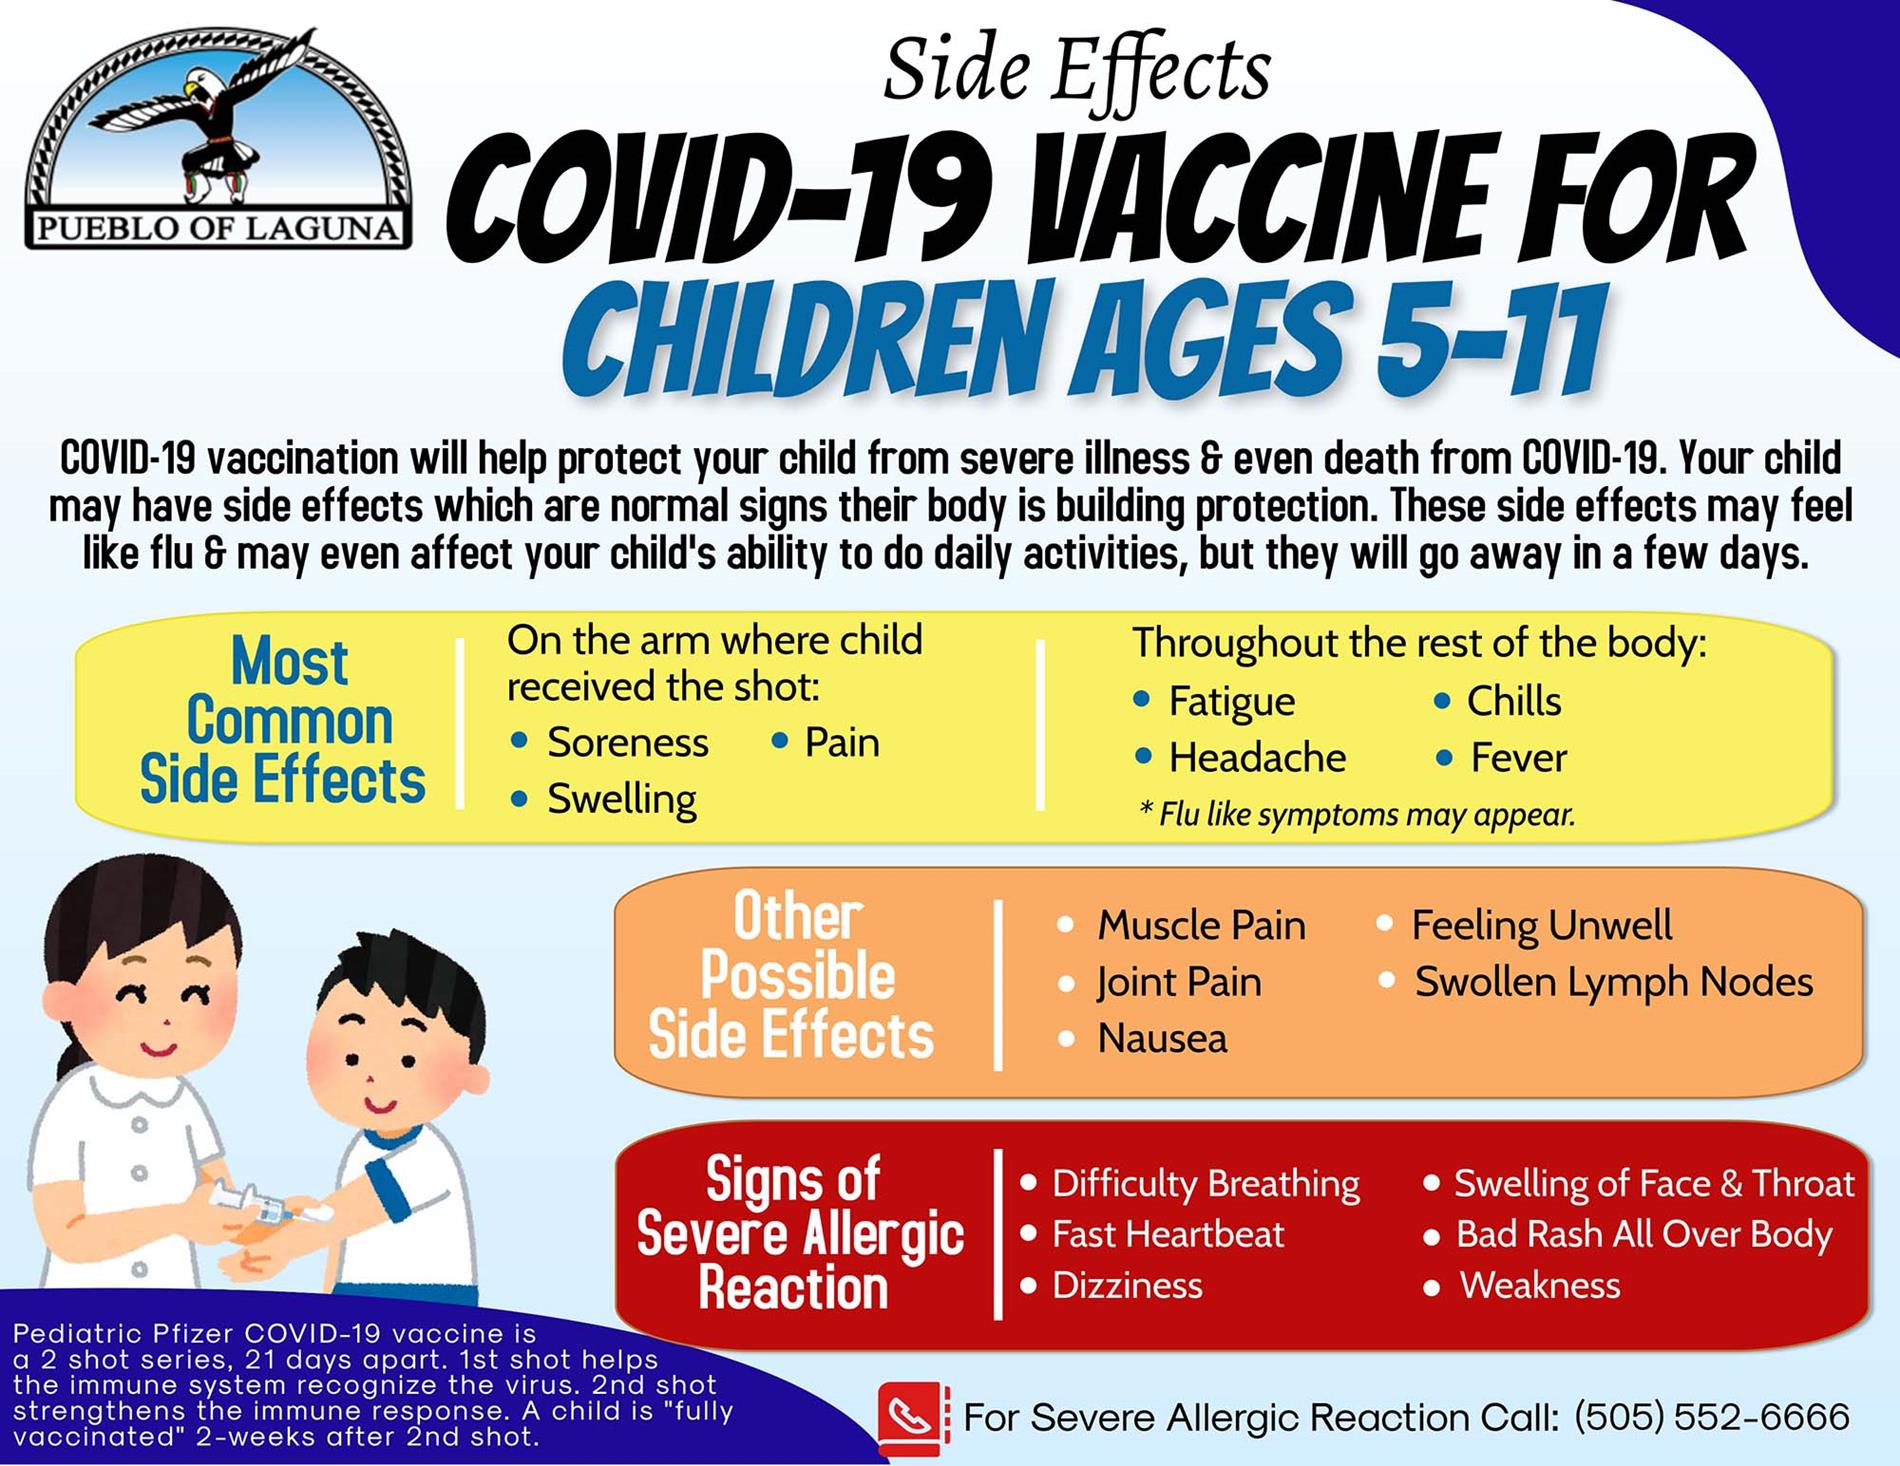 Common Side Effects for the COVID19 Vaccine